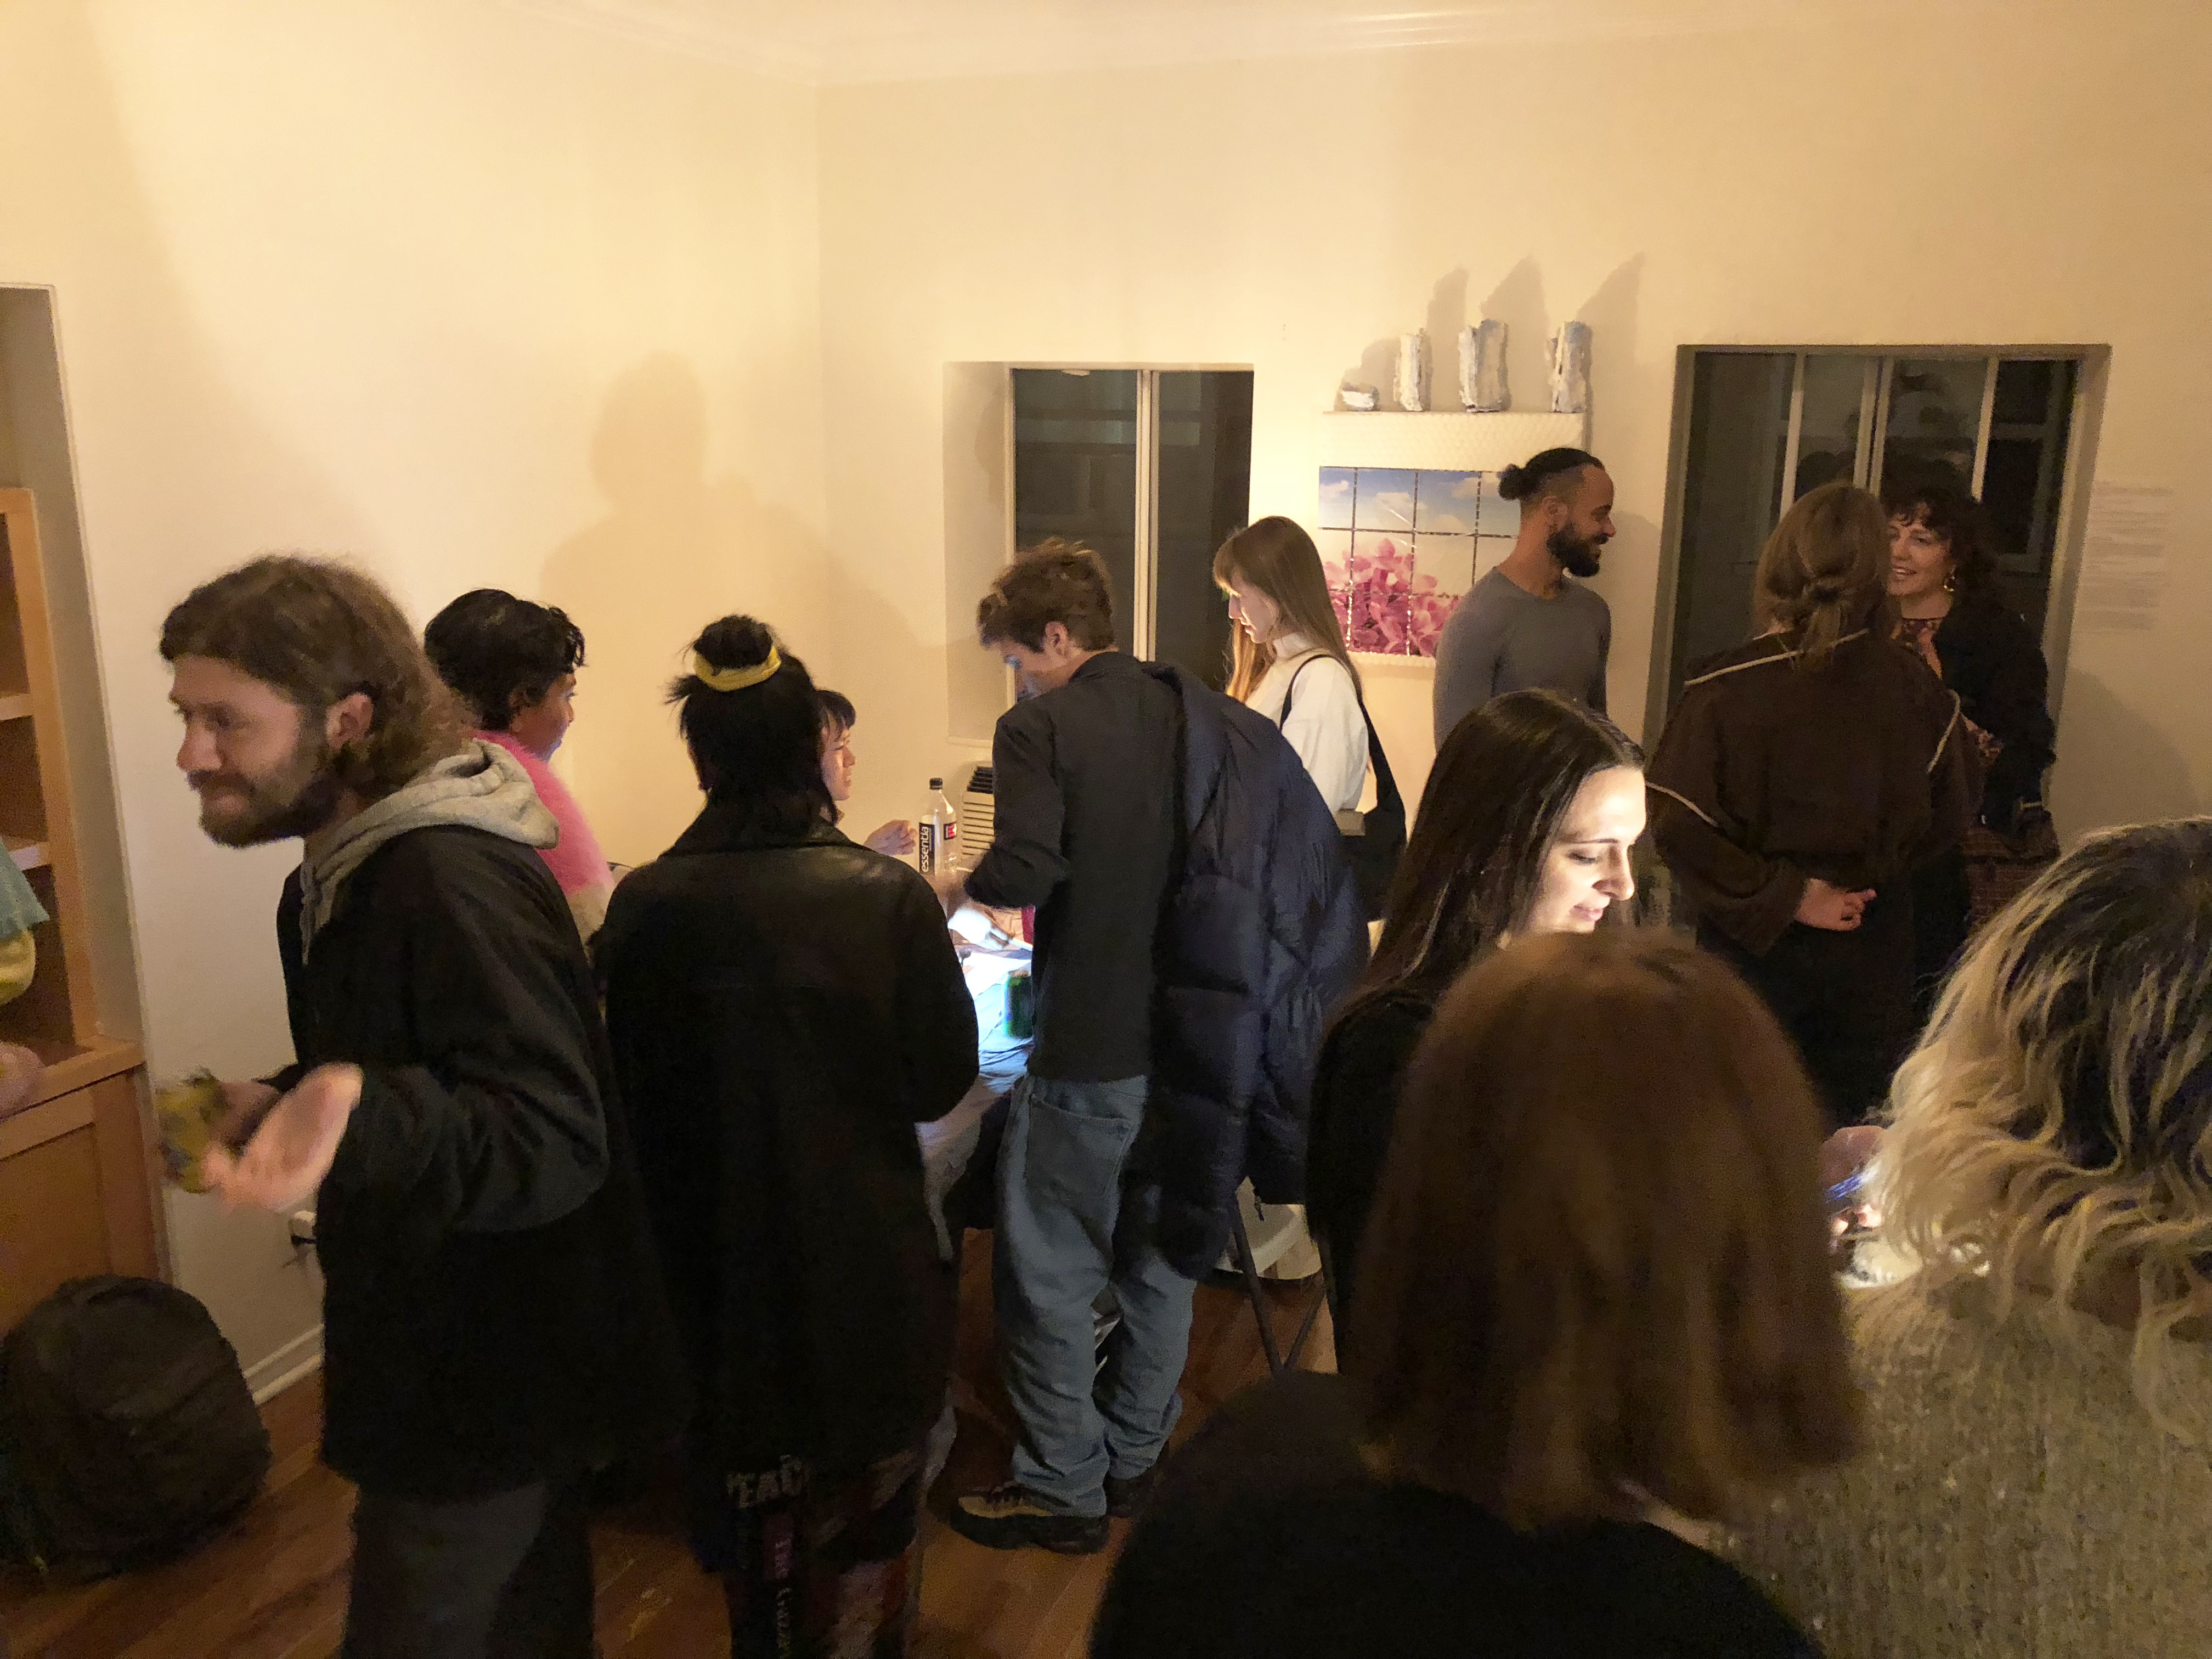 Crowd of people socializing in a small room